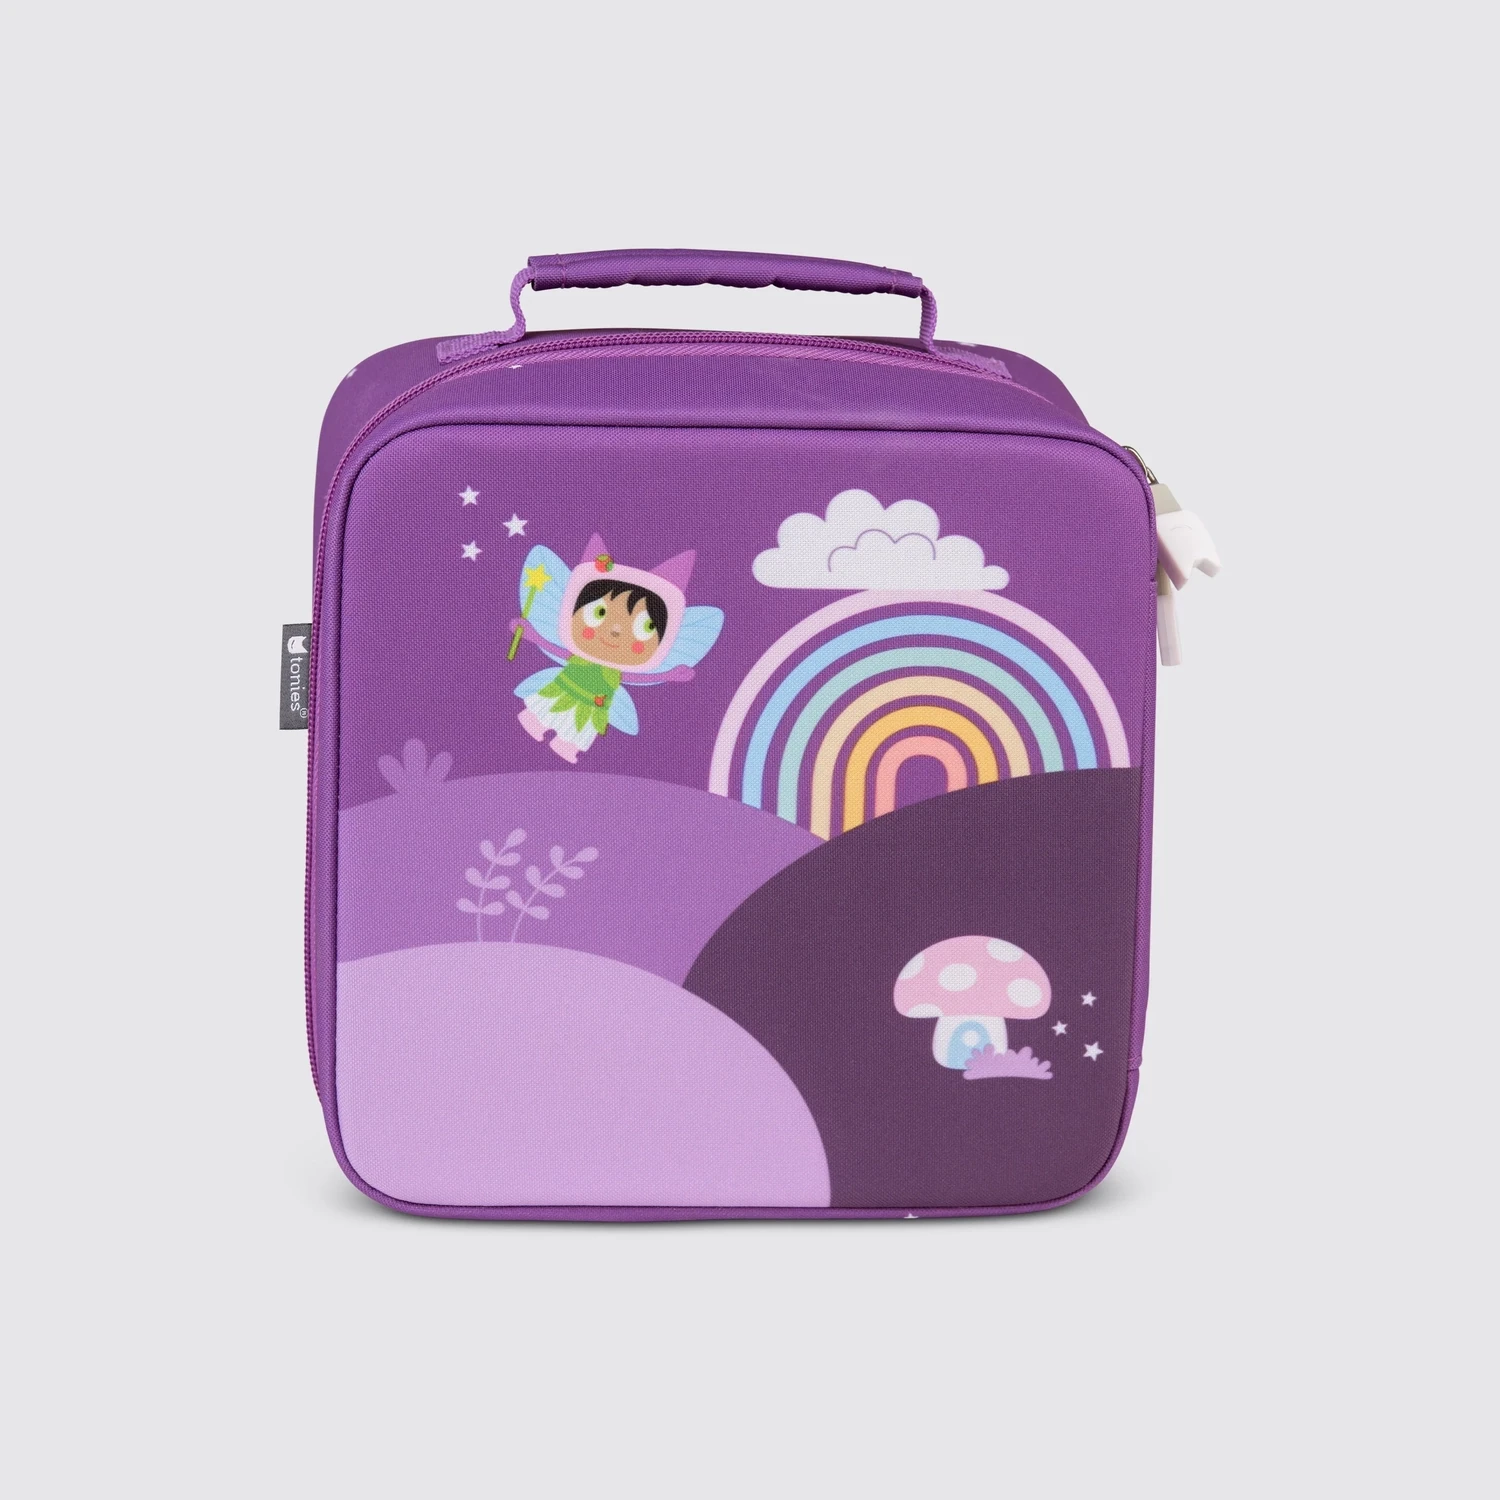 Tonie- Carrying Case Max Over the Rainbow